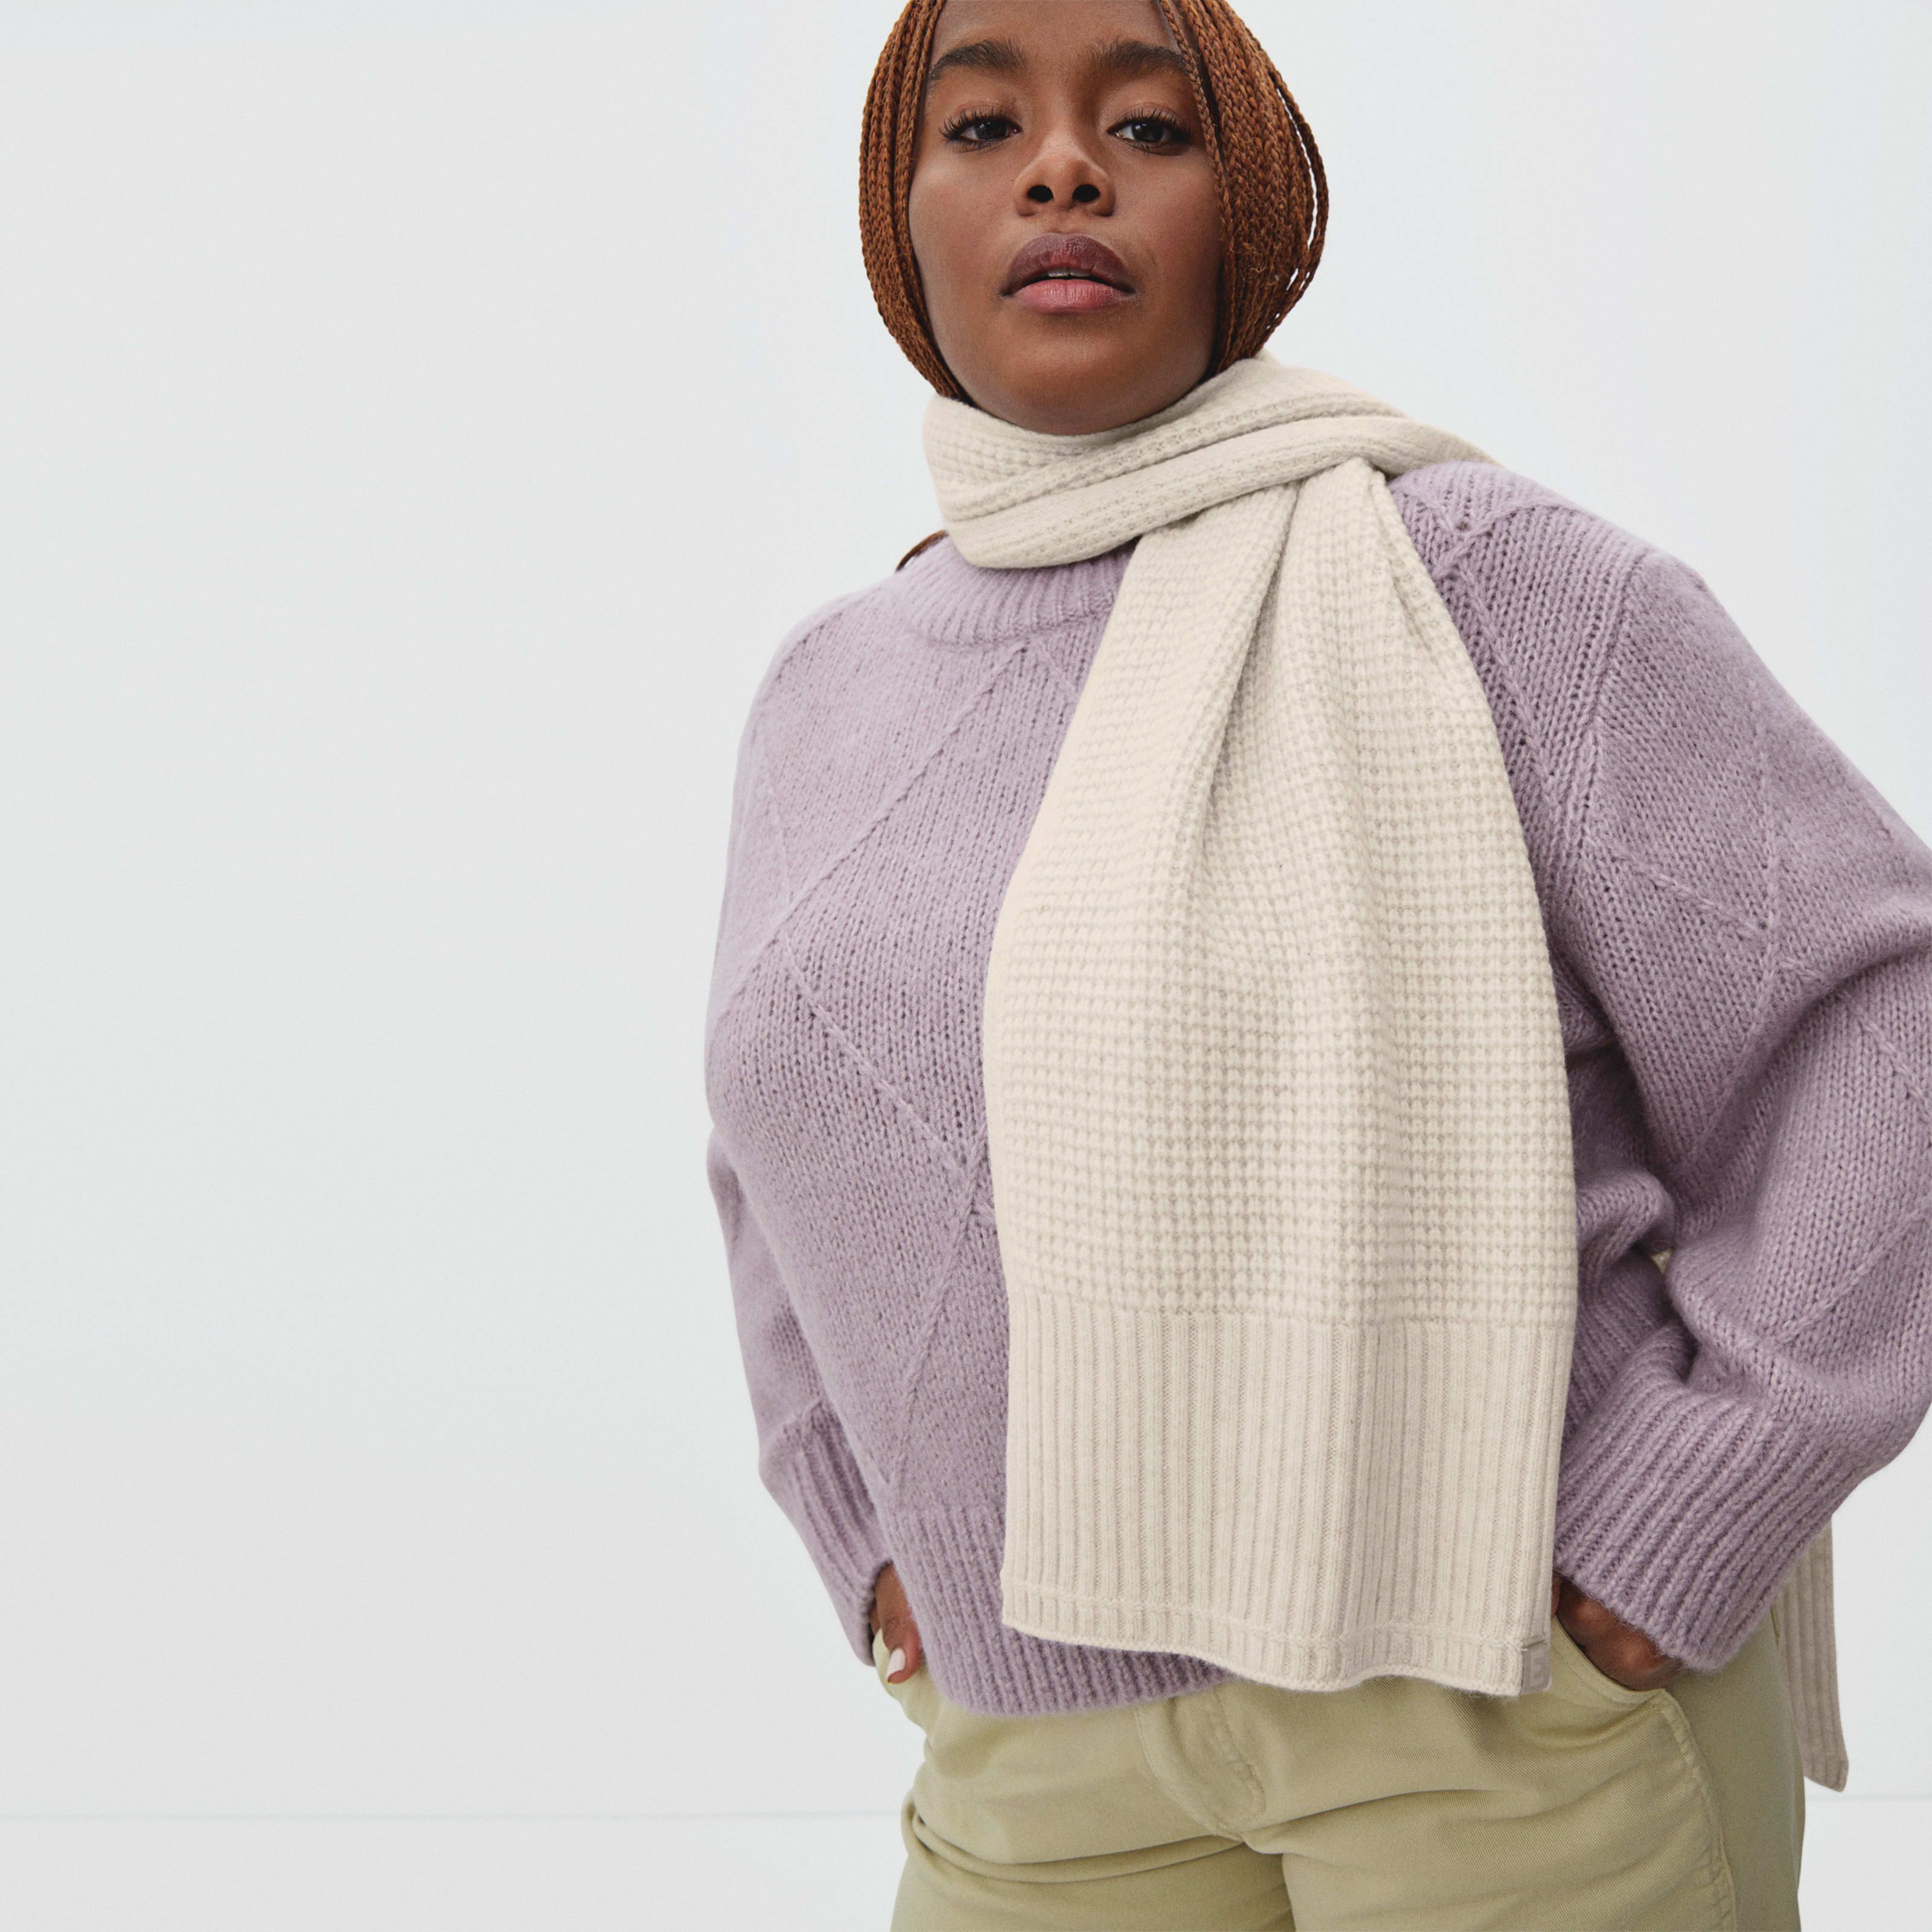 Women's Felted Merino Waffle-Knit Scarf by Everlane in Heathered Oat | Everlane